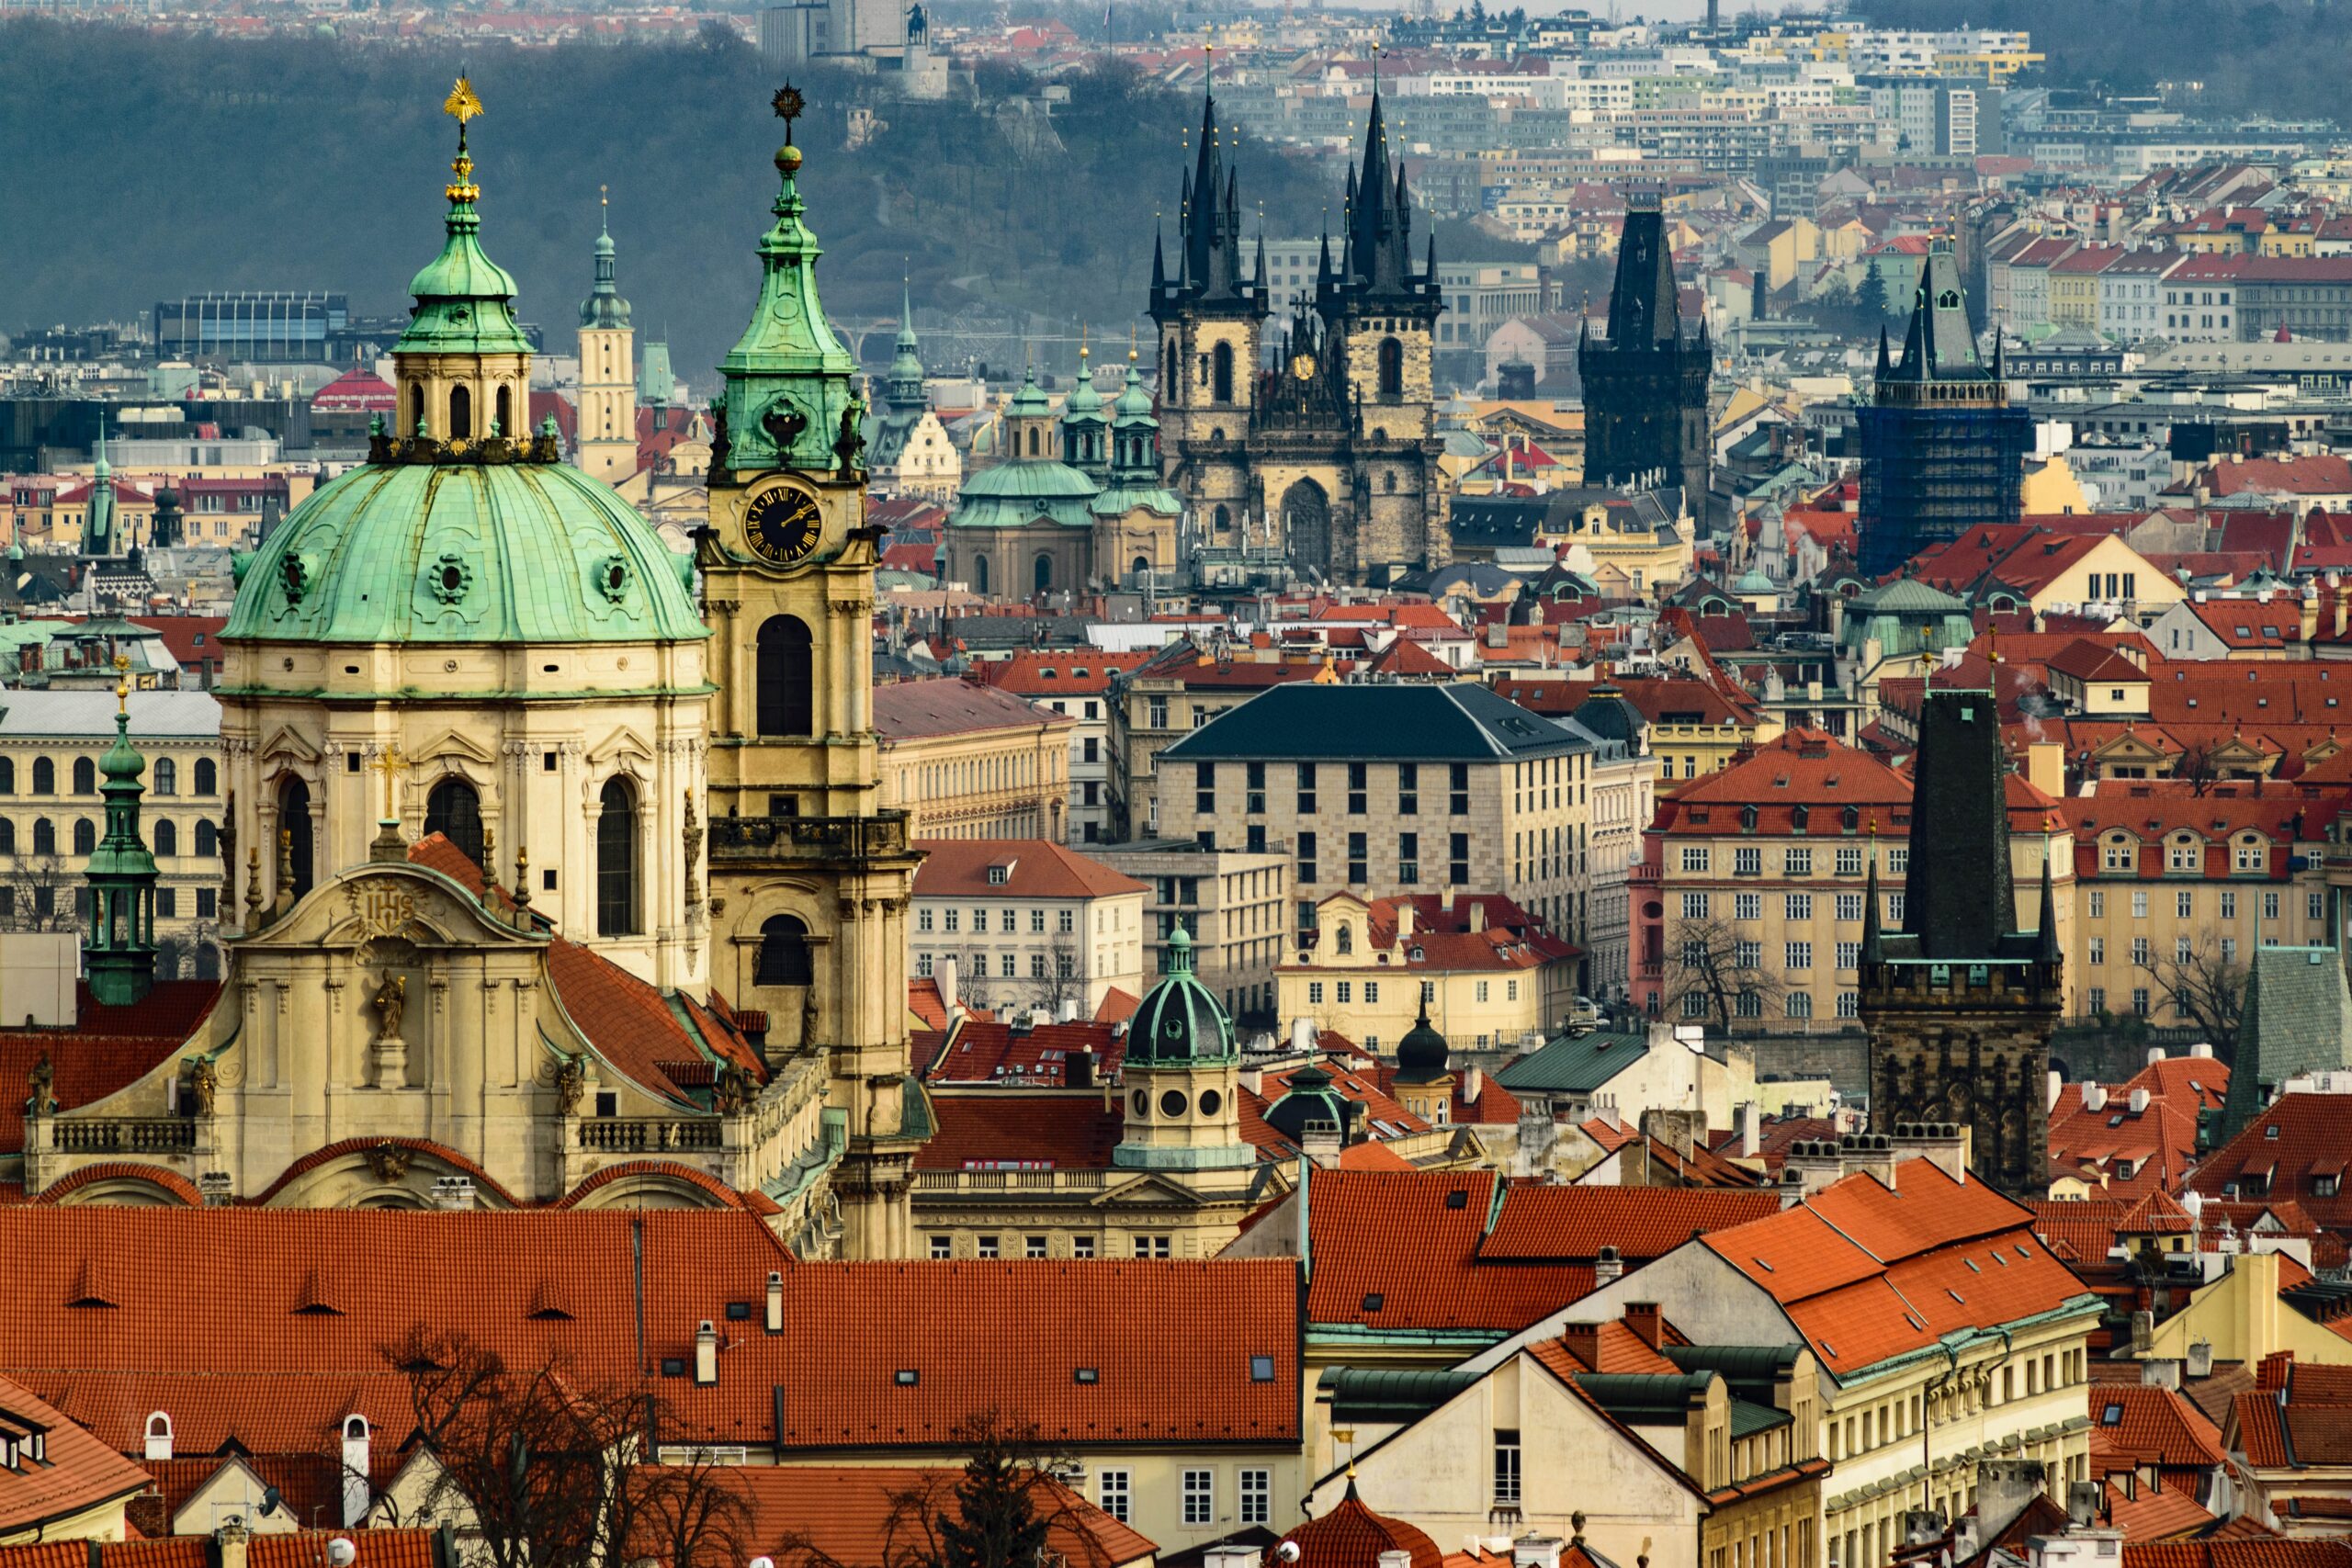 Prague: Why should you invest?